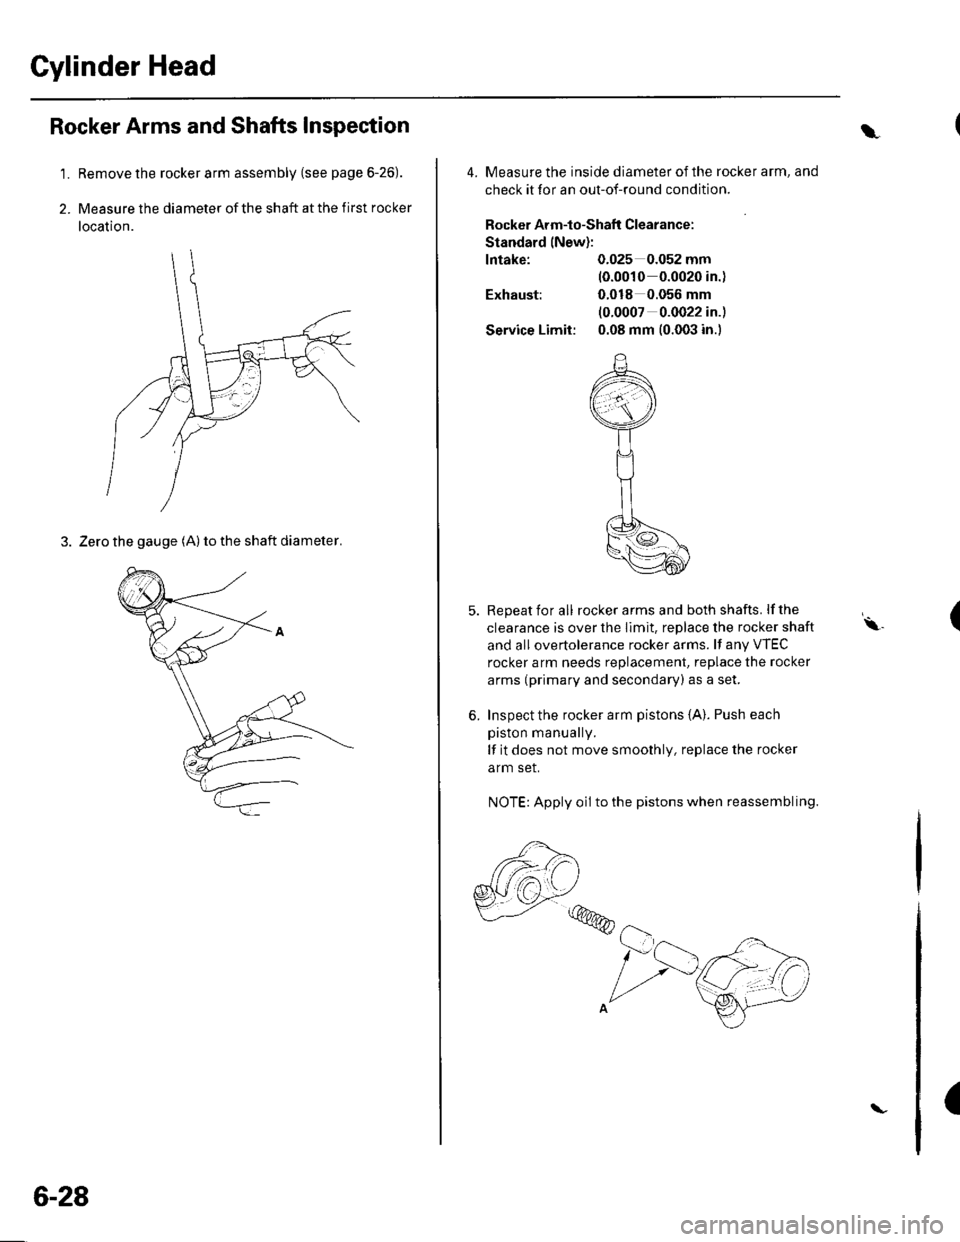 HONDA CIVIC 2003 7.G Owners Guide Cylinder Head
1.
2.
Rocker Arms and Shafts Inspection
Remove the rocker arm assembly (see page 6-26).
Measure the diameter of the shaft at the first rocker
location.
3. Zero the gauge (A) to the shaft